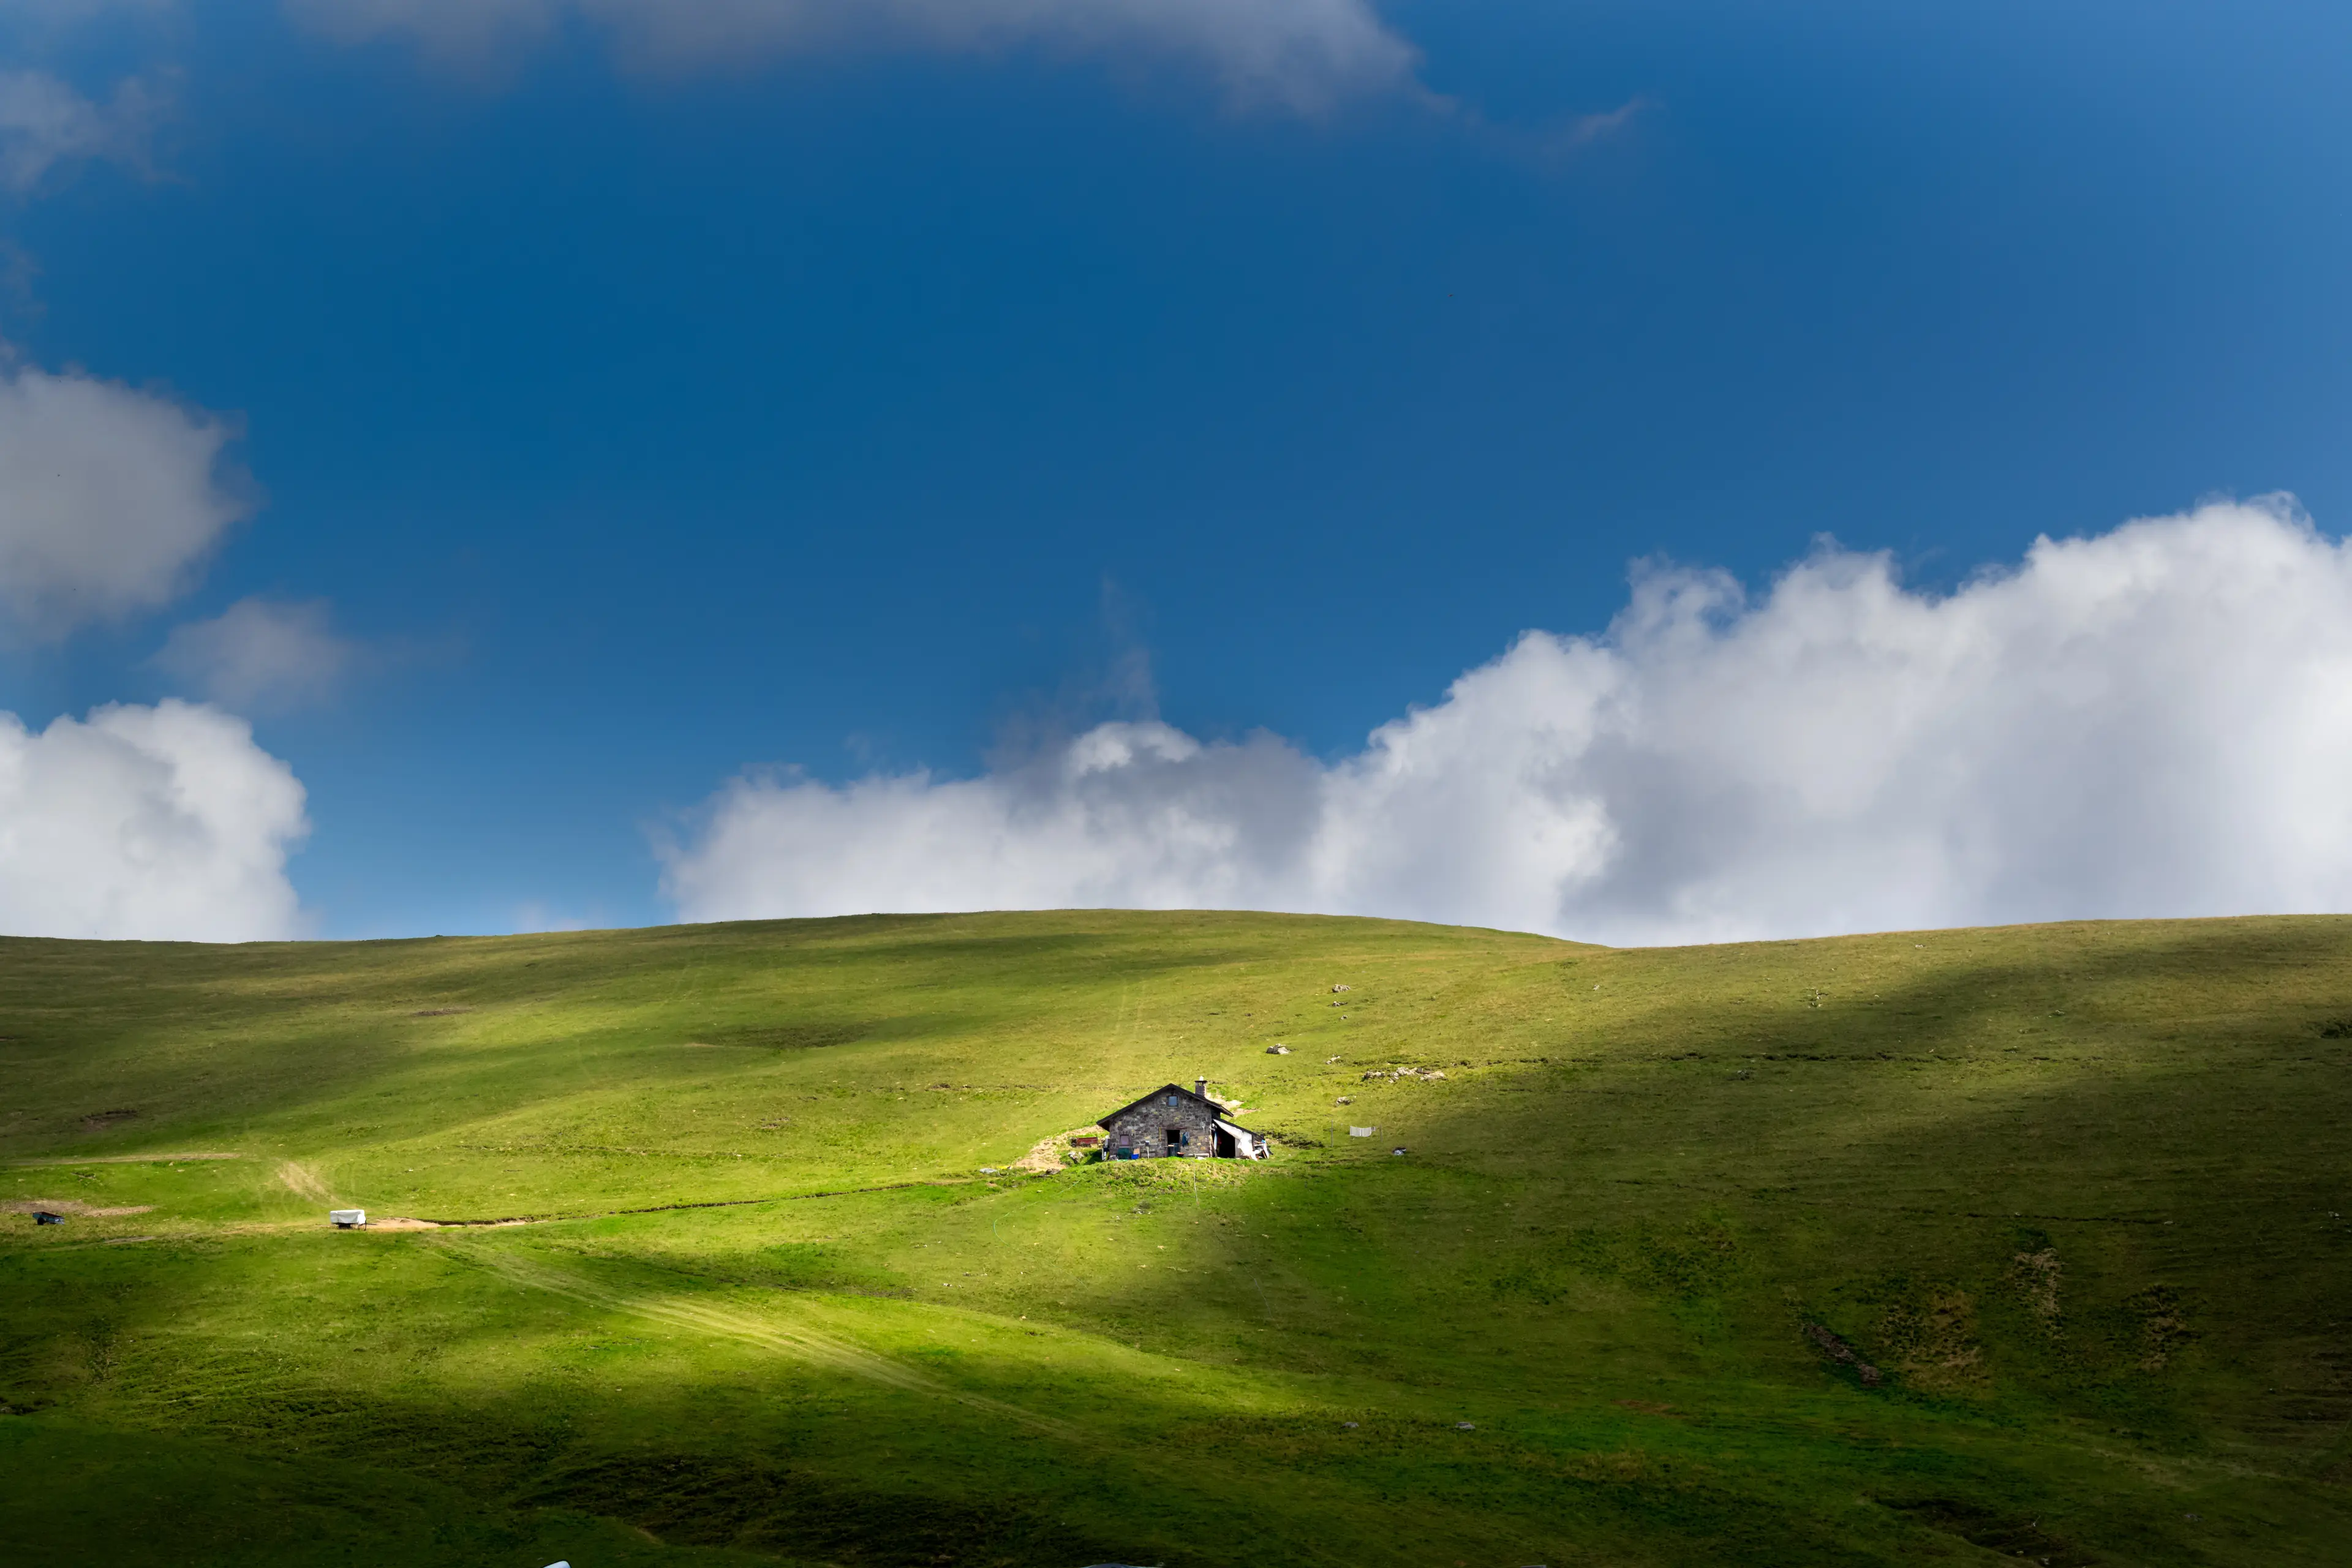 Grassy hill with an isolated cabin, the Piani dell'Avaro, Val Brembana